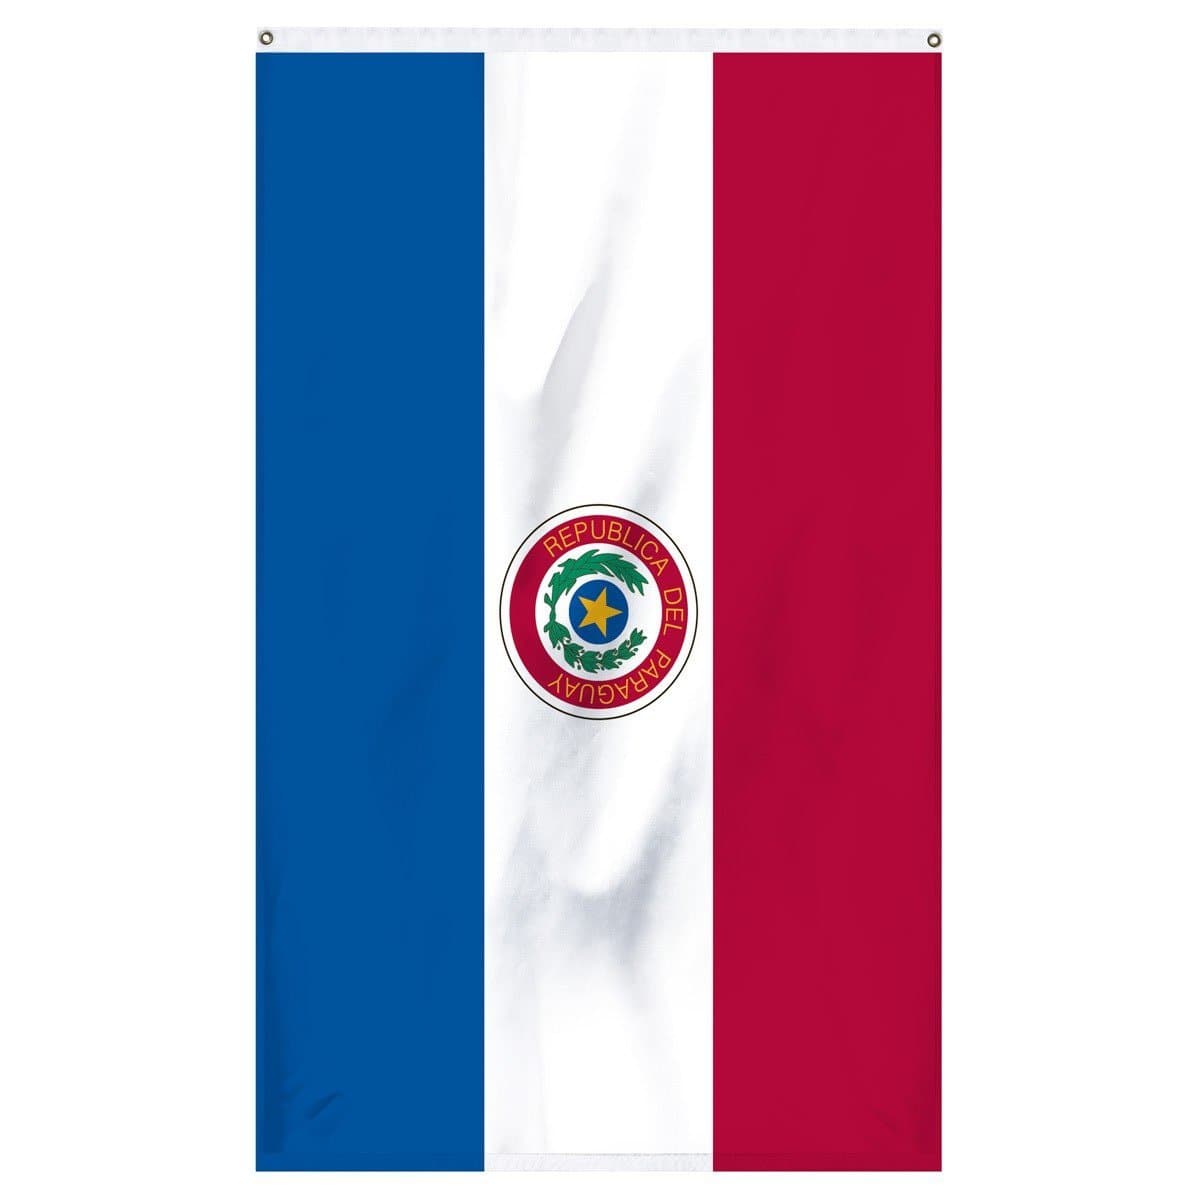 Paraguay National flag for sale to buy online now from Atlantic Flag and Pole